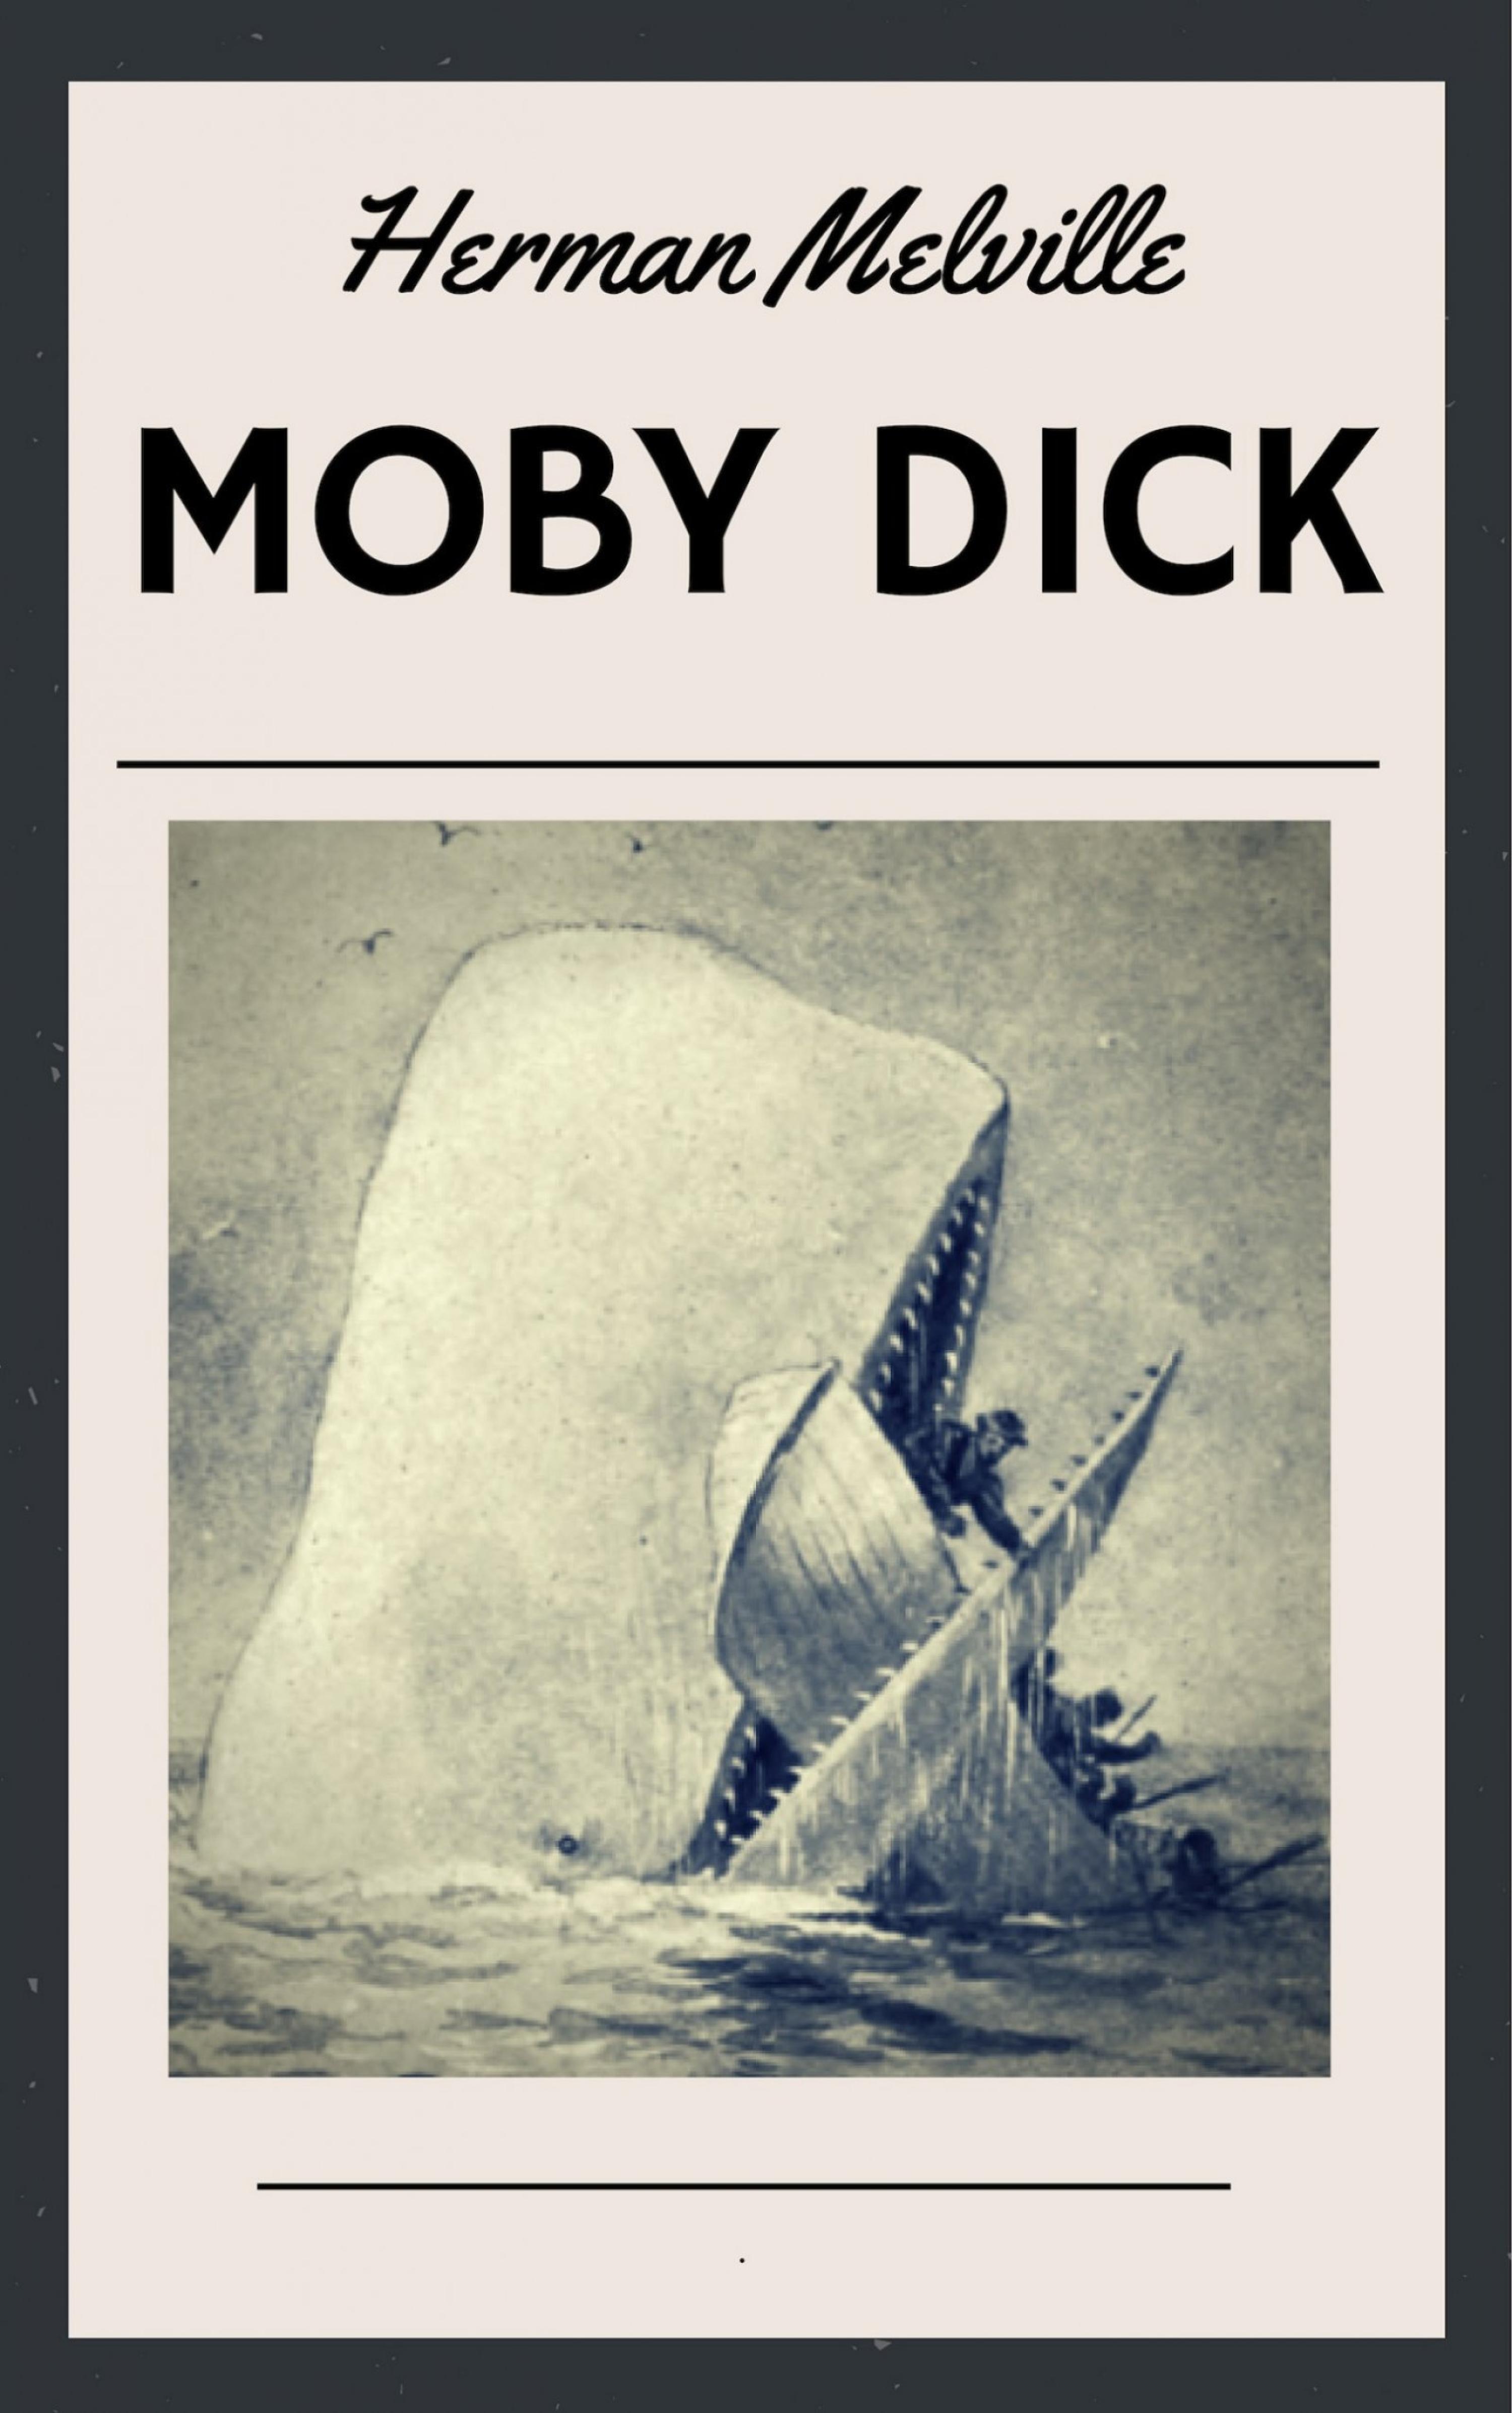 What genre is moby dick